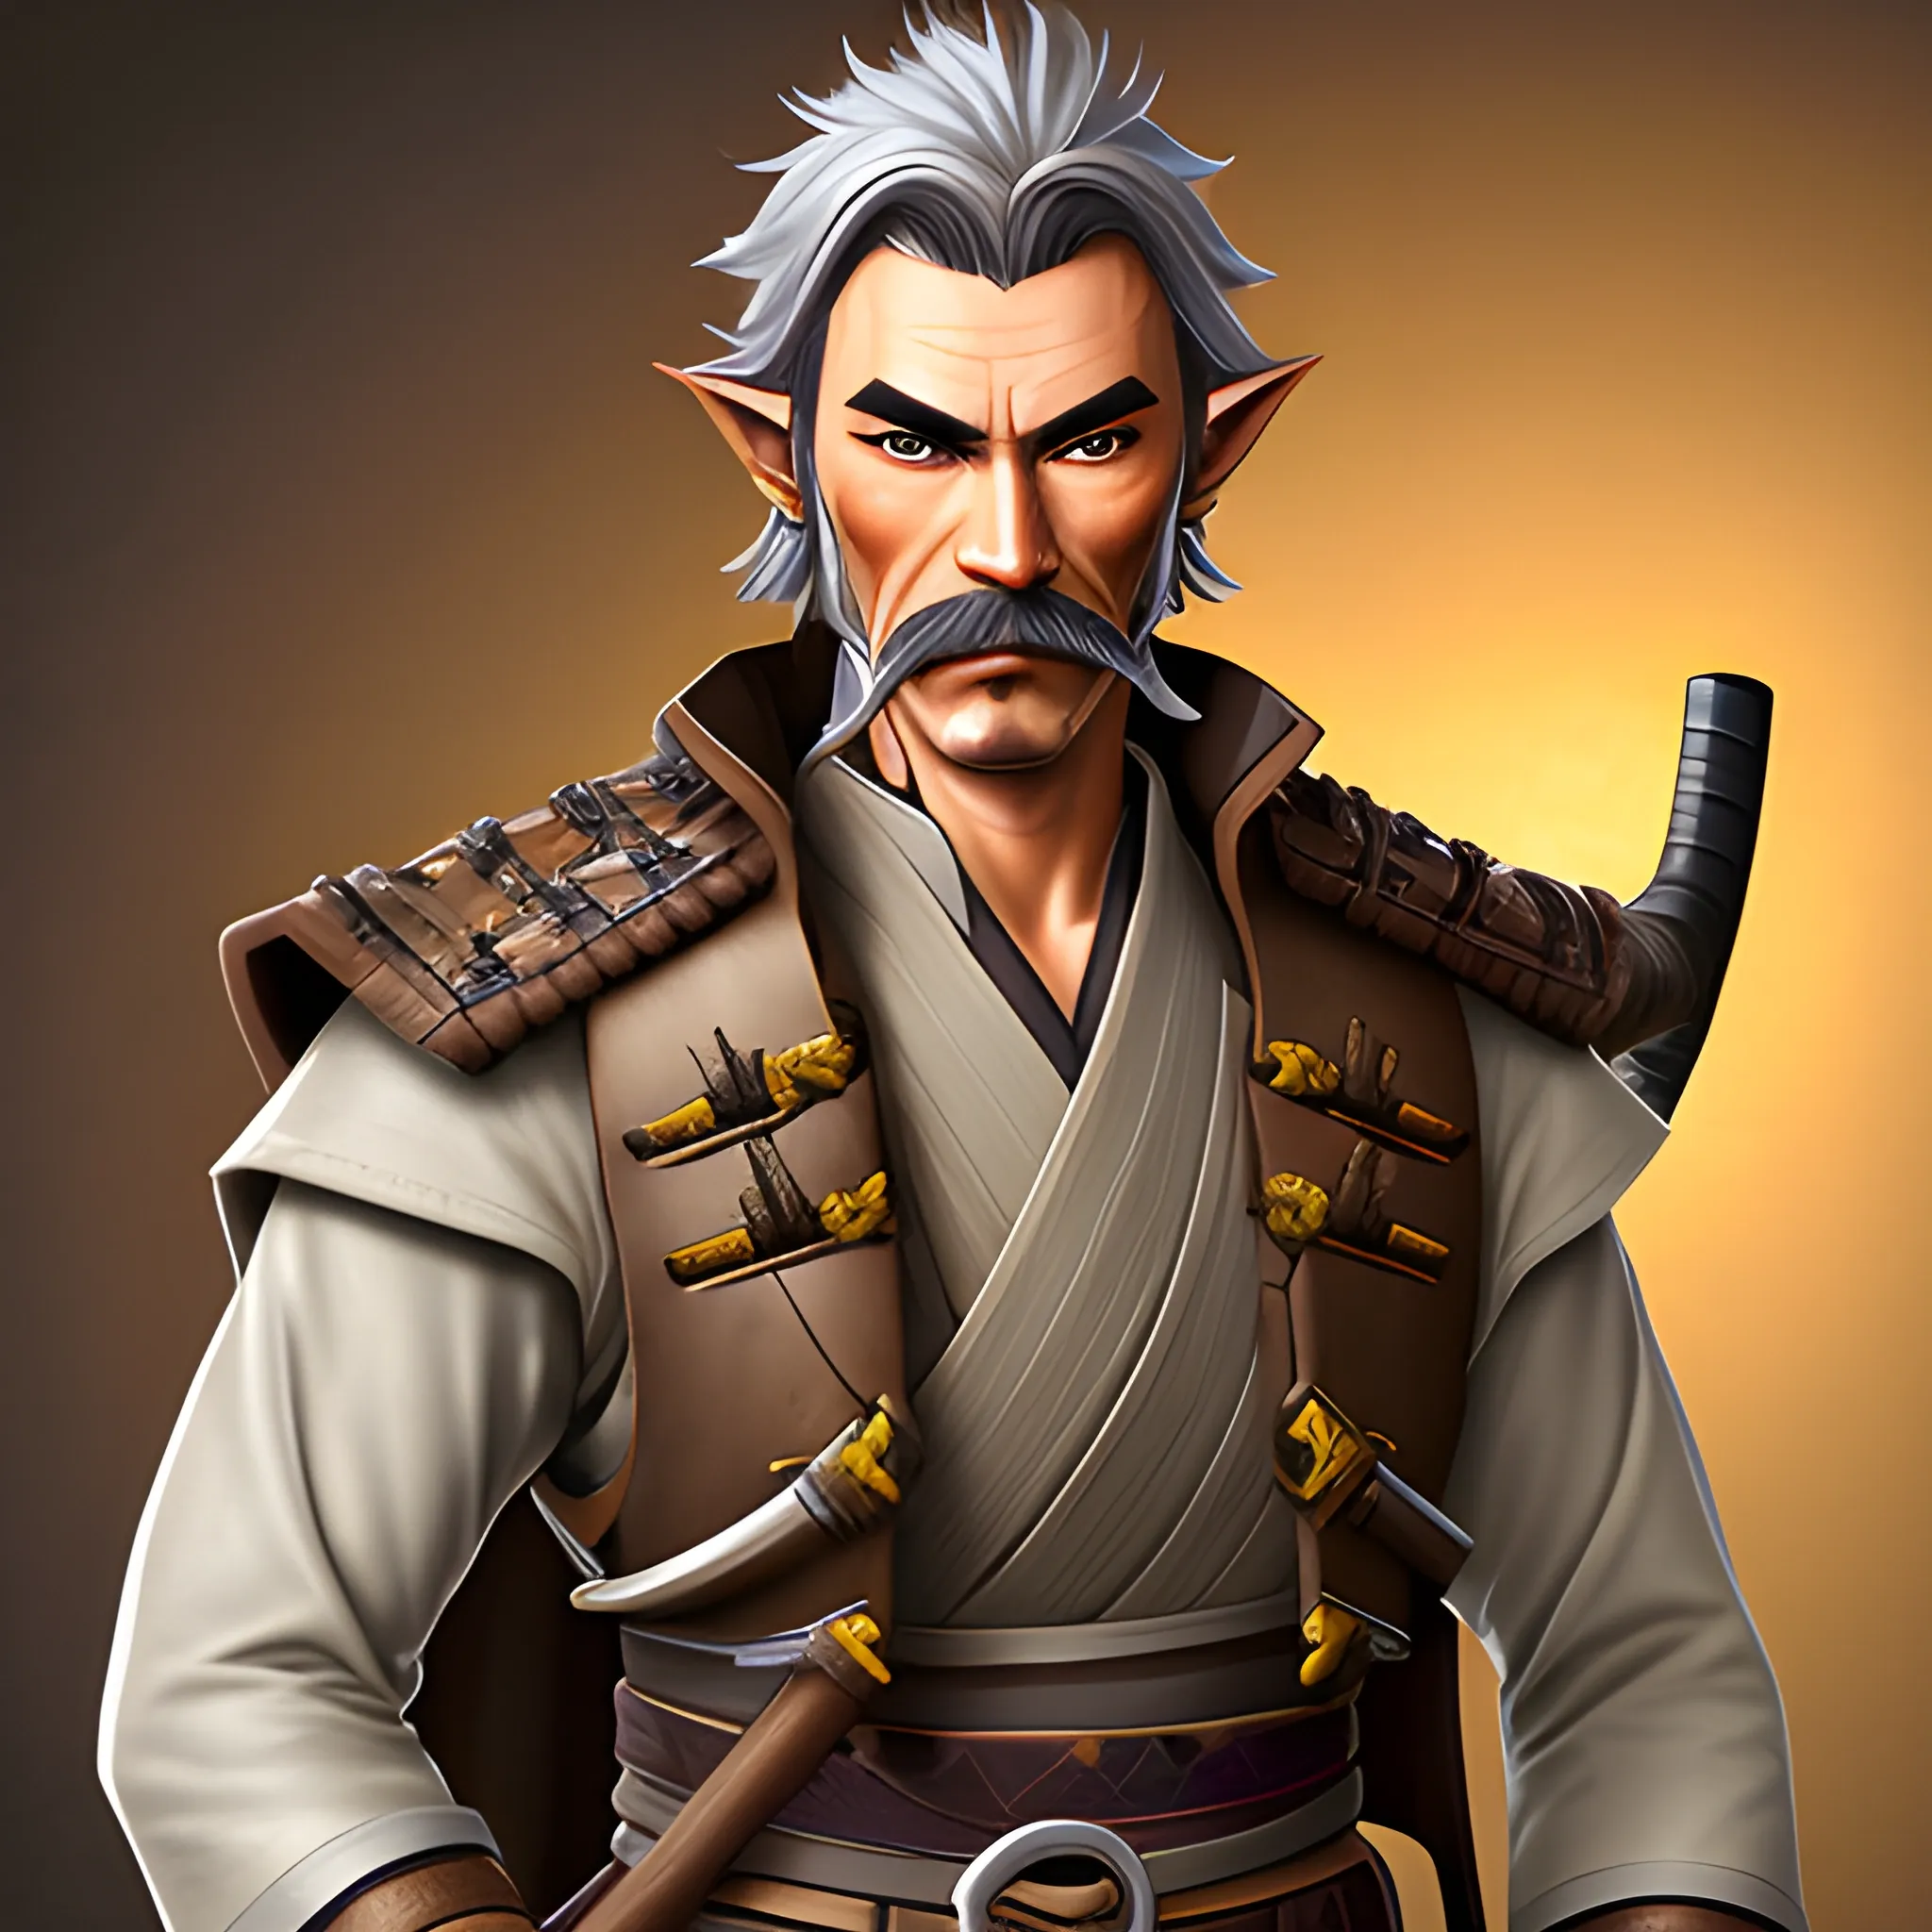  a Samurai Fighter in 5E and is a Wood Elf with dark brown hairs relatively tan skin, and silver eyes. He wears a worn leather duster over a vest with a white shirt and tie (much like the portrait) and has a handlebar mustache,He carries a rifle with veins of glowing red crystal running through it
